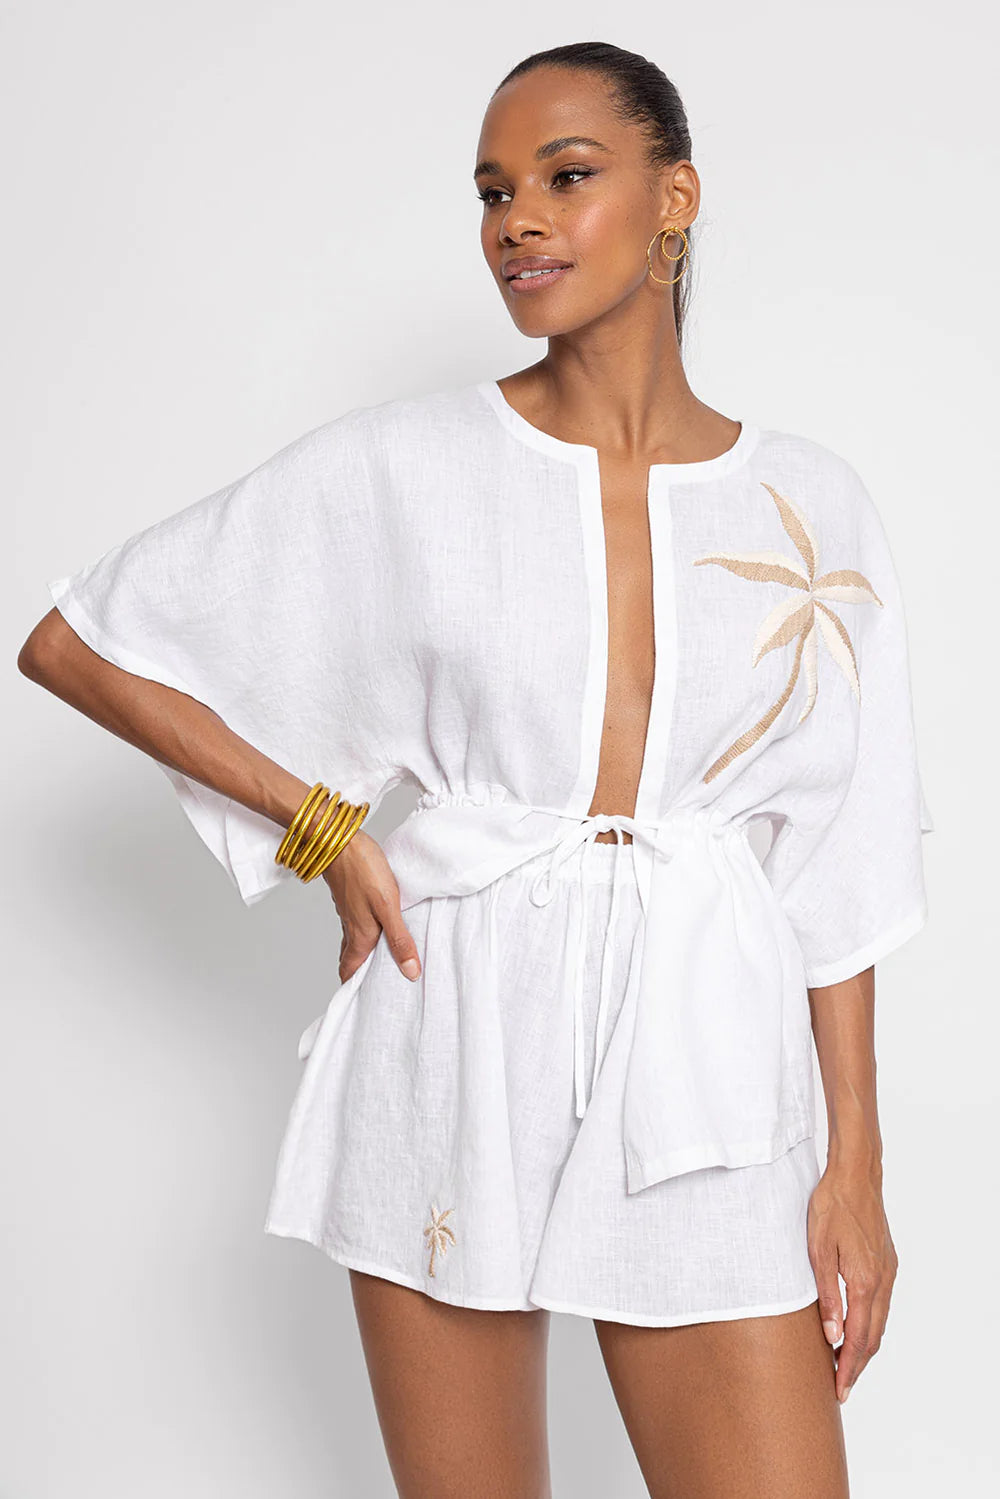 Sundress Adela Cover up white with palm tree hand embroidered